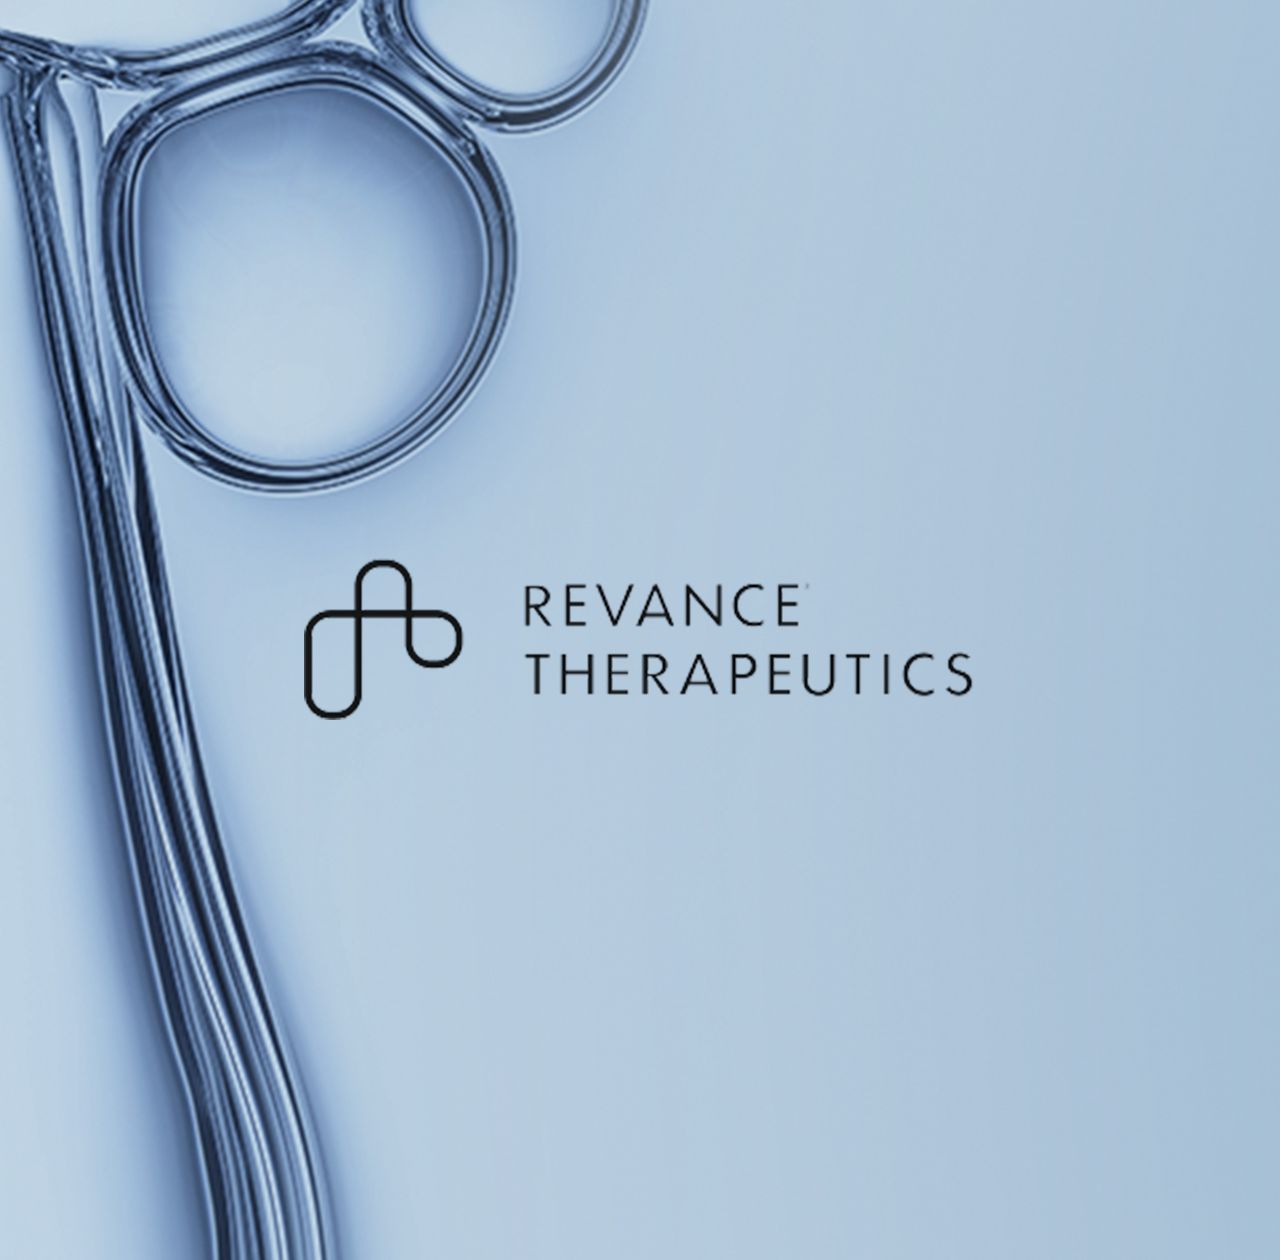 Exclusive U.S. Distribution Agreement of FDA-Approved RHA Dermal Fillers with Revance Therapeutics, Inc.